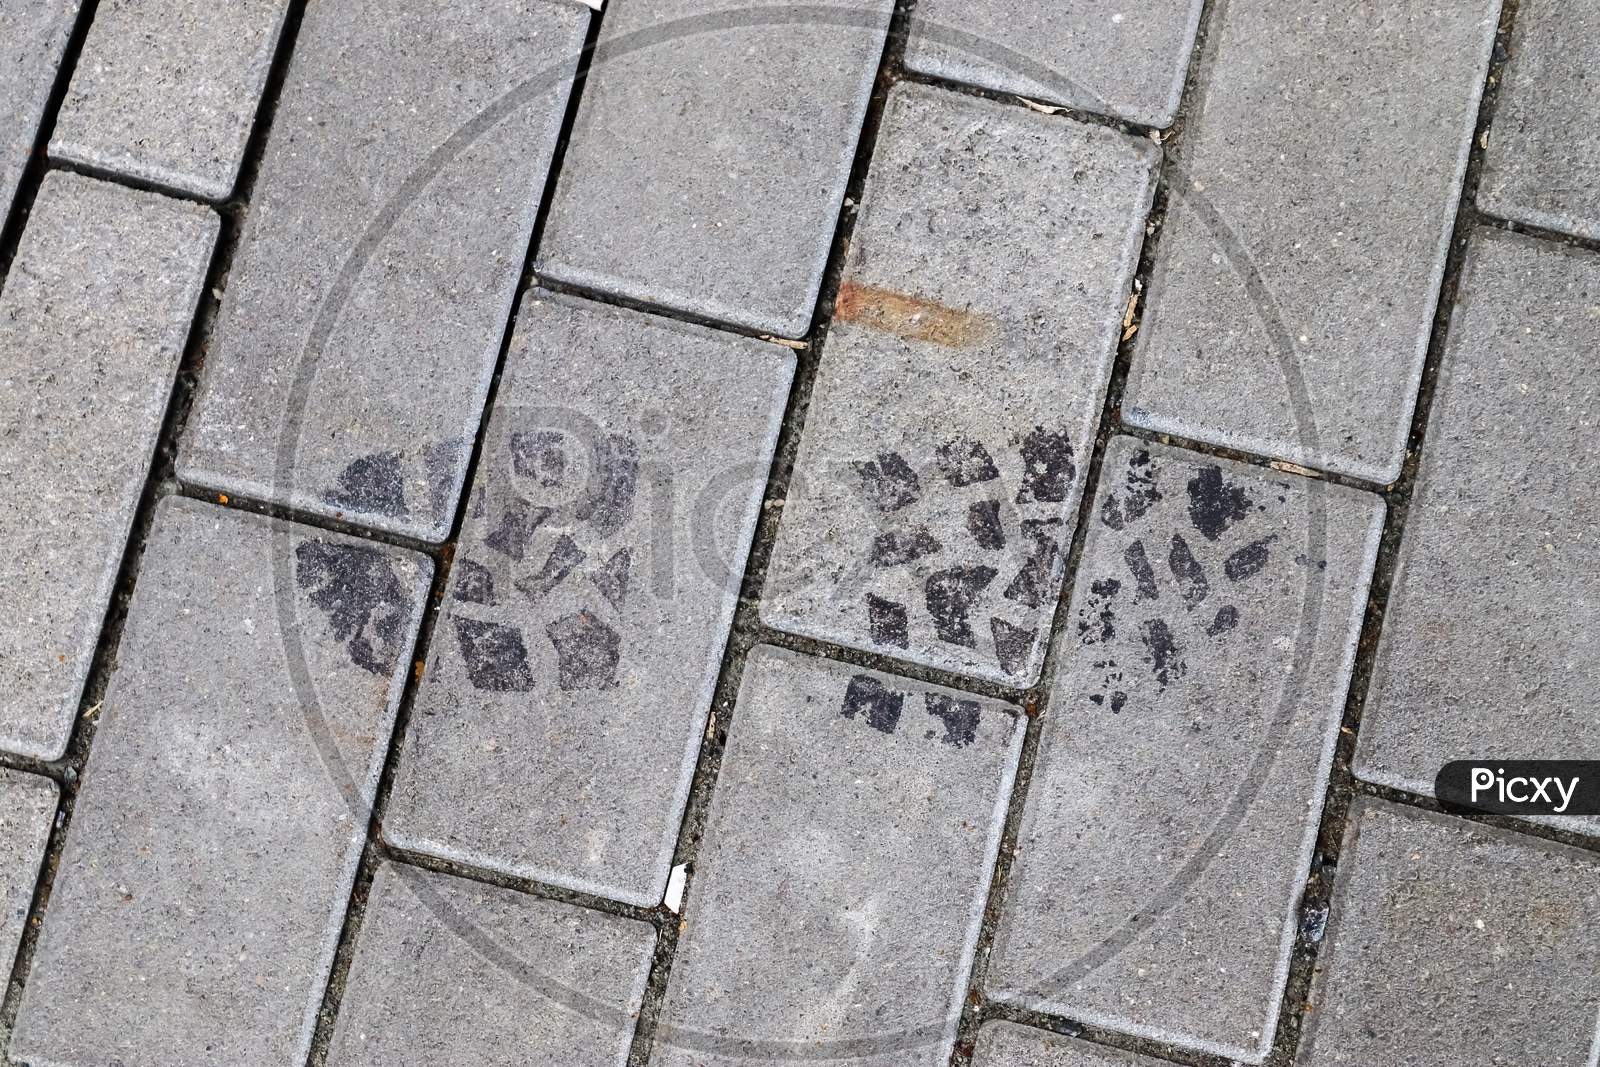 Detailed Close Up On Old Historical Cobblestone Roads And Walkways